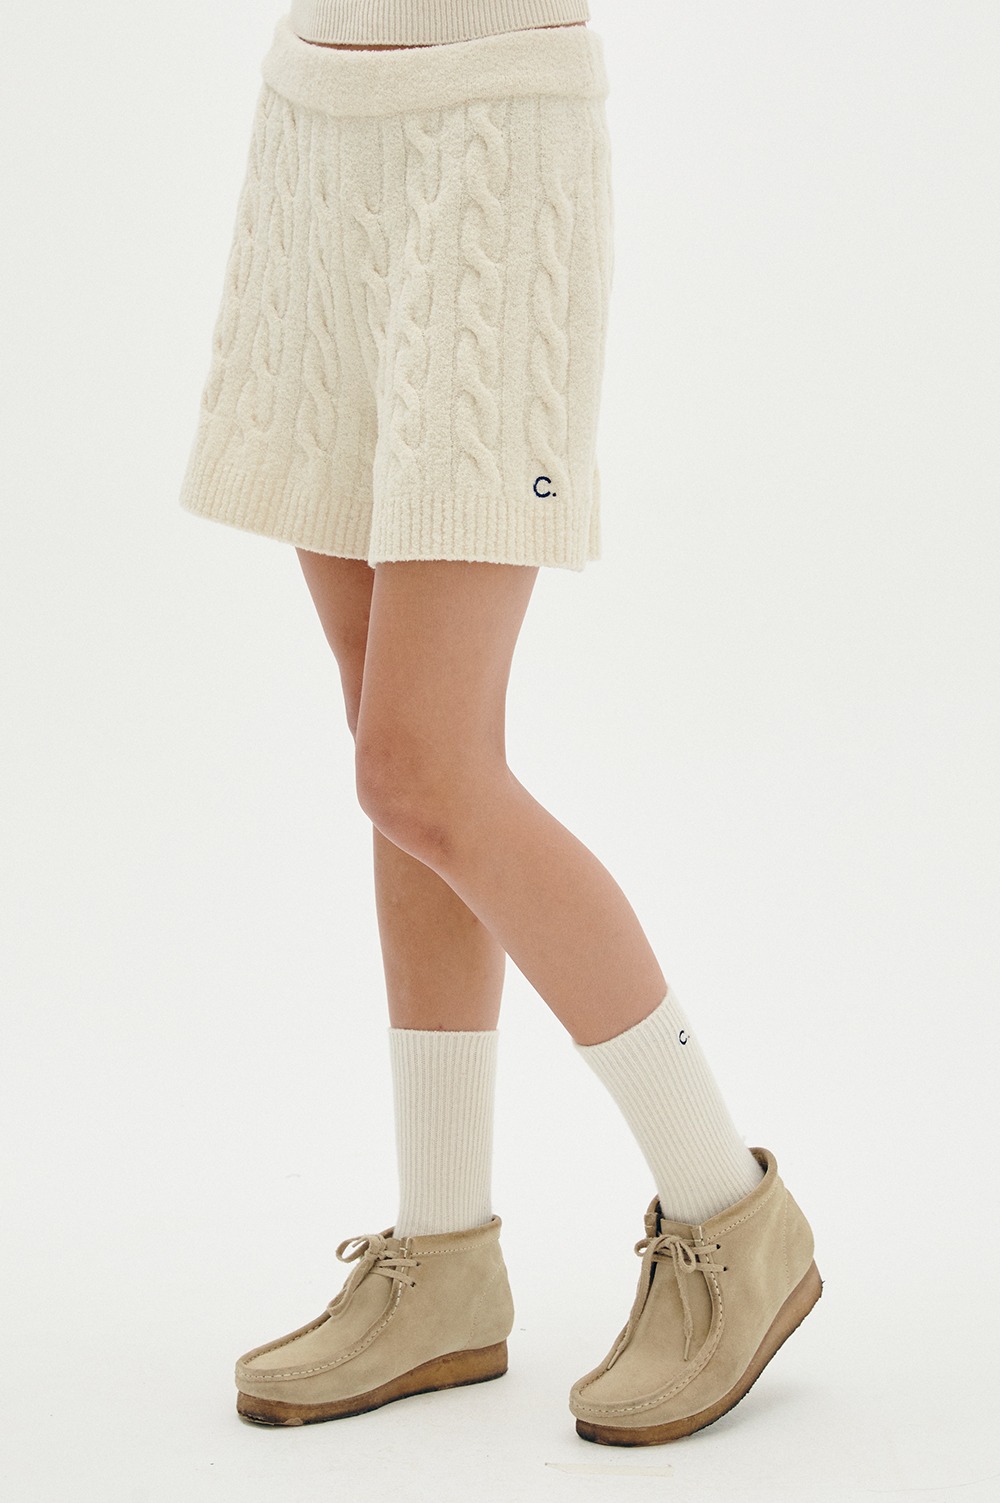 clove - [22FW clove] Cable Knit Shorts (Ivory)